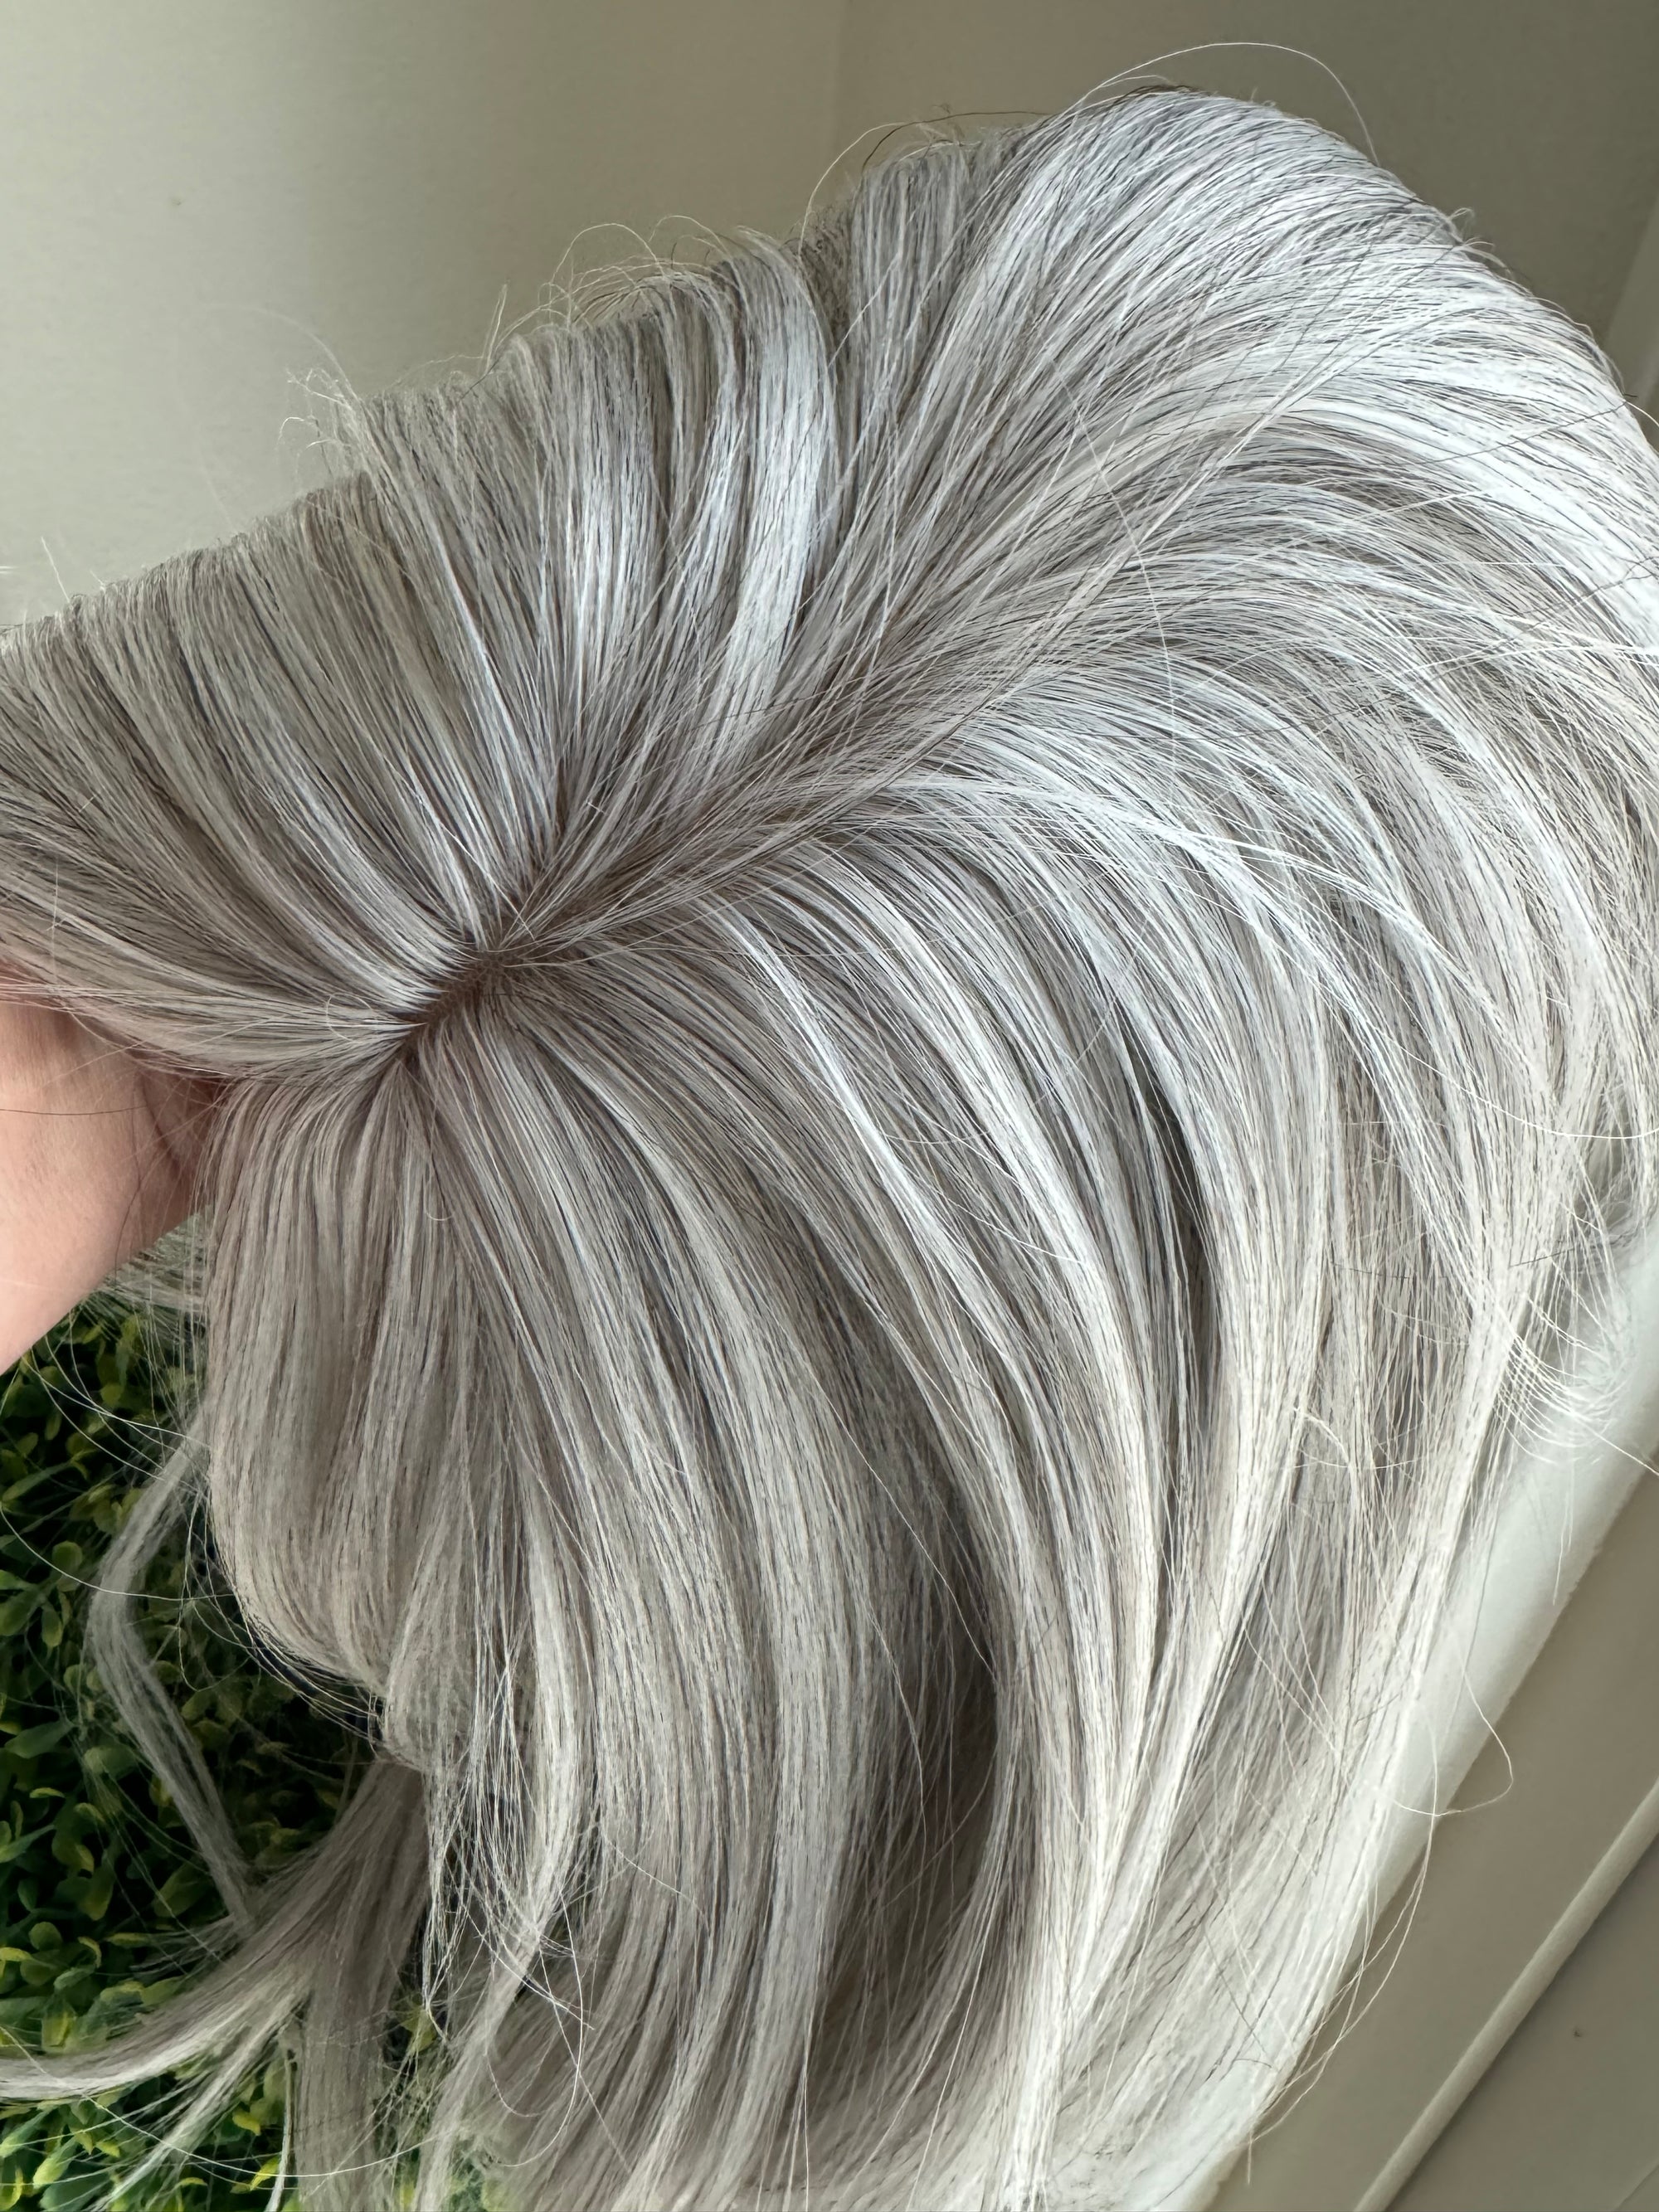 Grey hair toppers